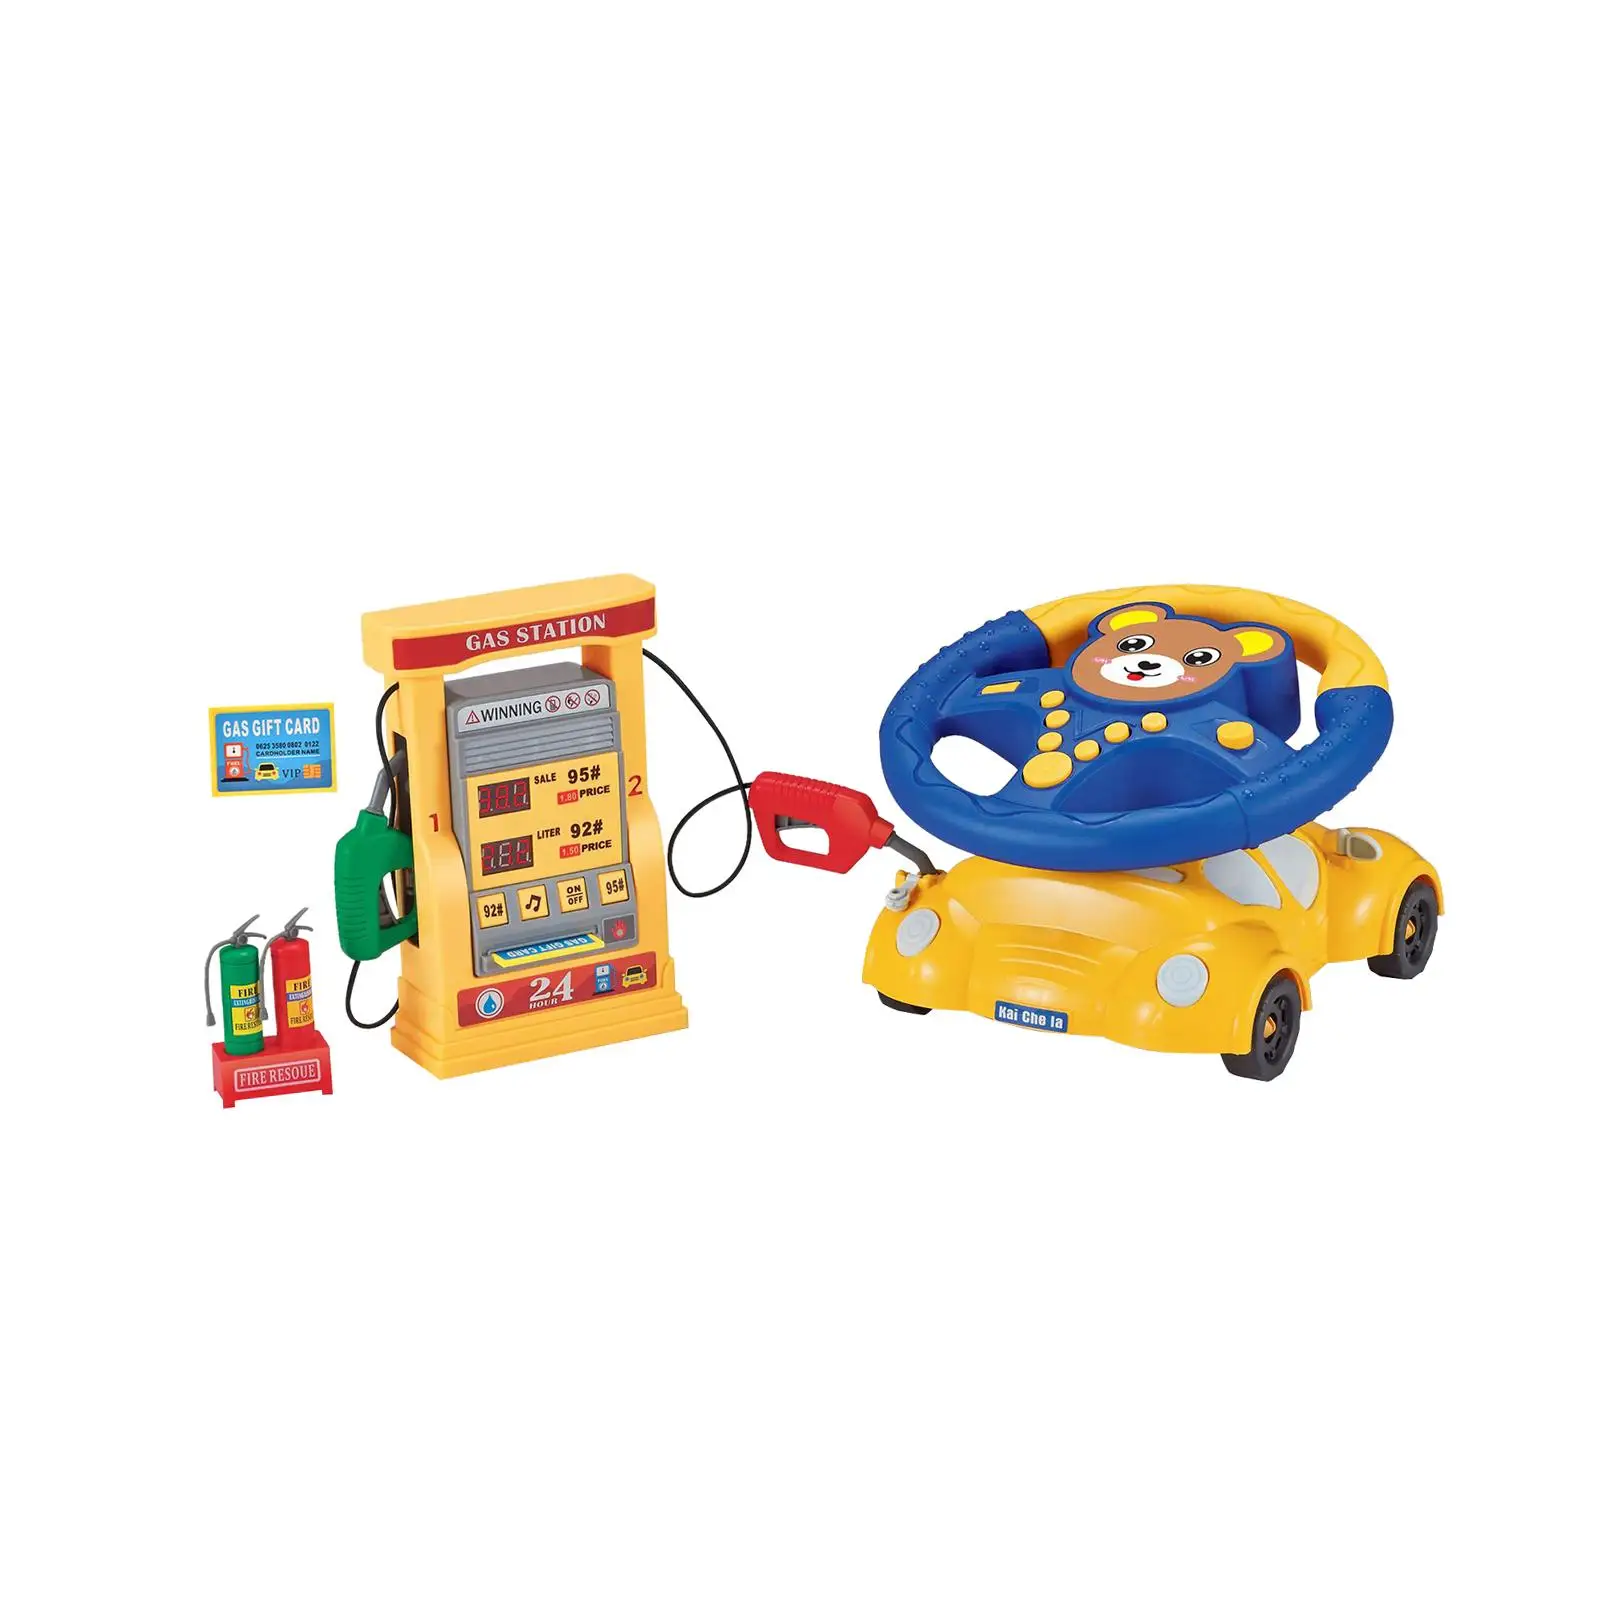 Simulation Gas Station Toy Pretend Play Puzzles Game Interesting Sound Developmental Steering Wheel Toy for Creative Gifts